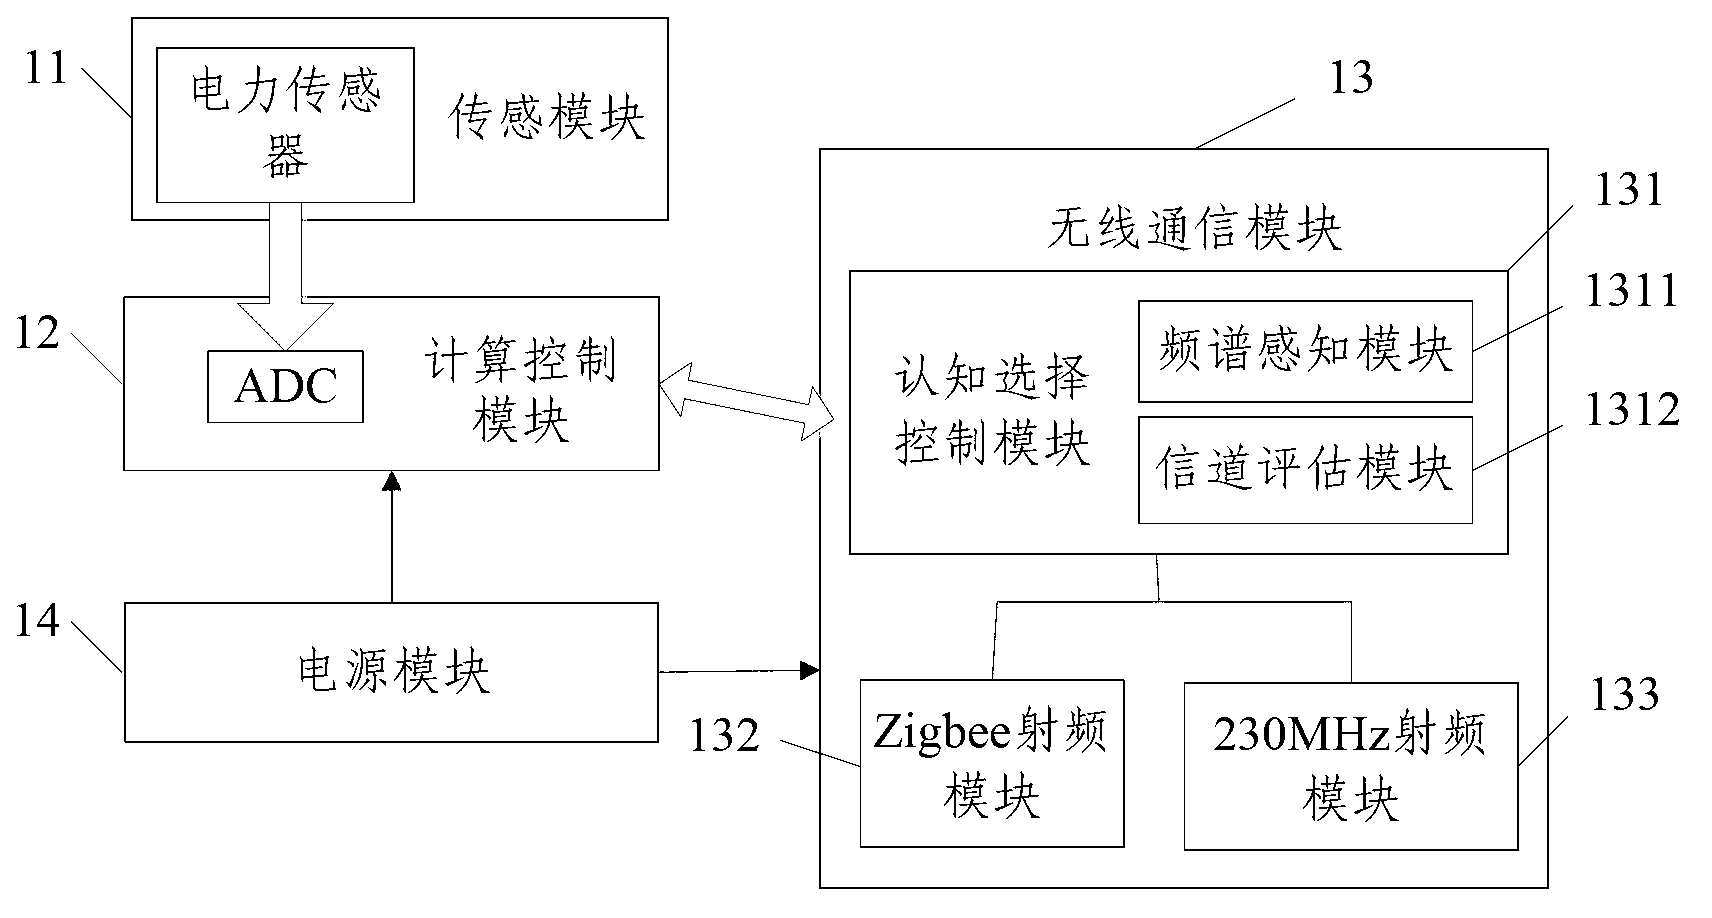 Cognitive radio based communication network system in intelligent power grid and networking method